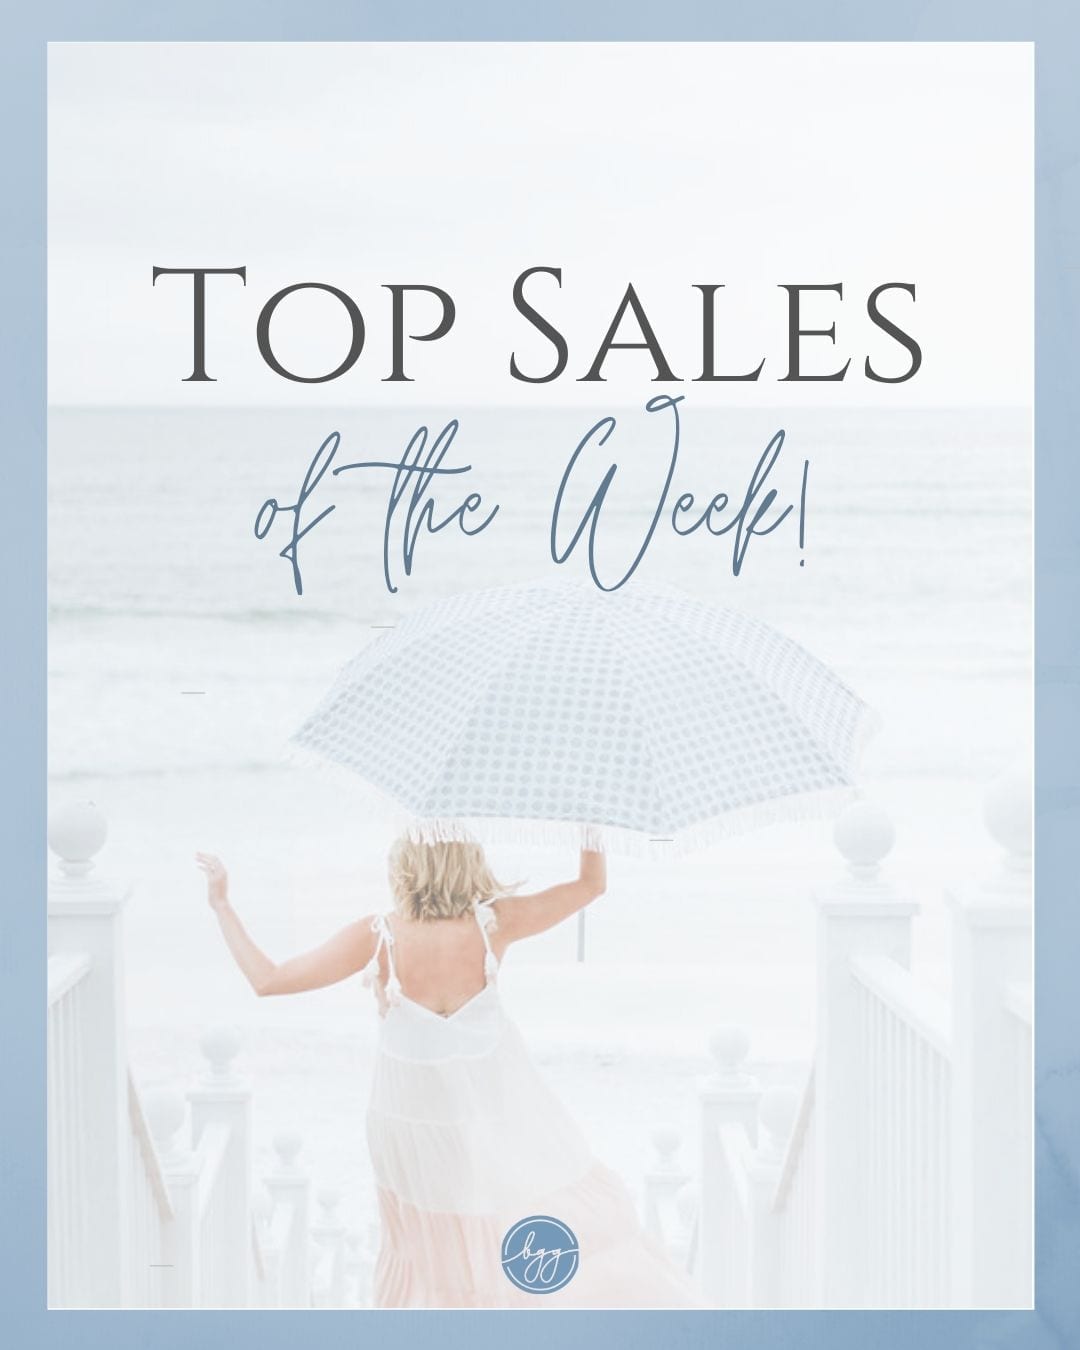 Top sales of the week for designer bathing suits on sale, Vineyard Vines Mens on sale, and Fathers Day gifts on sale.